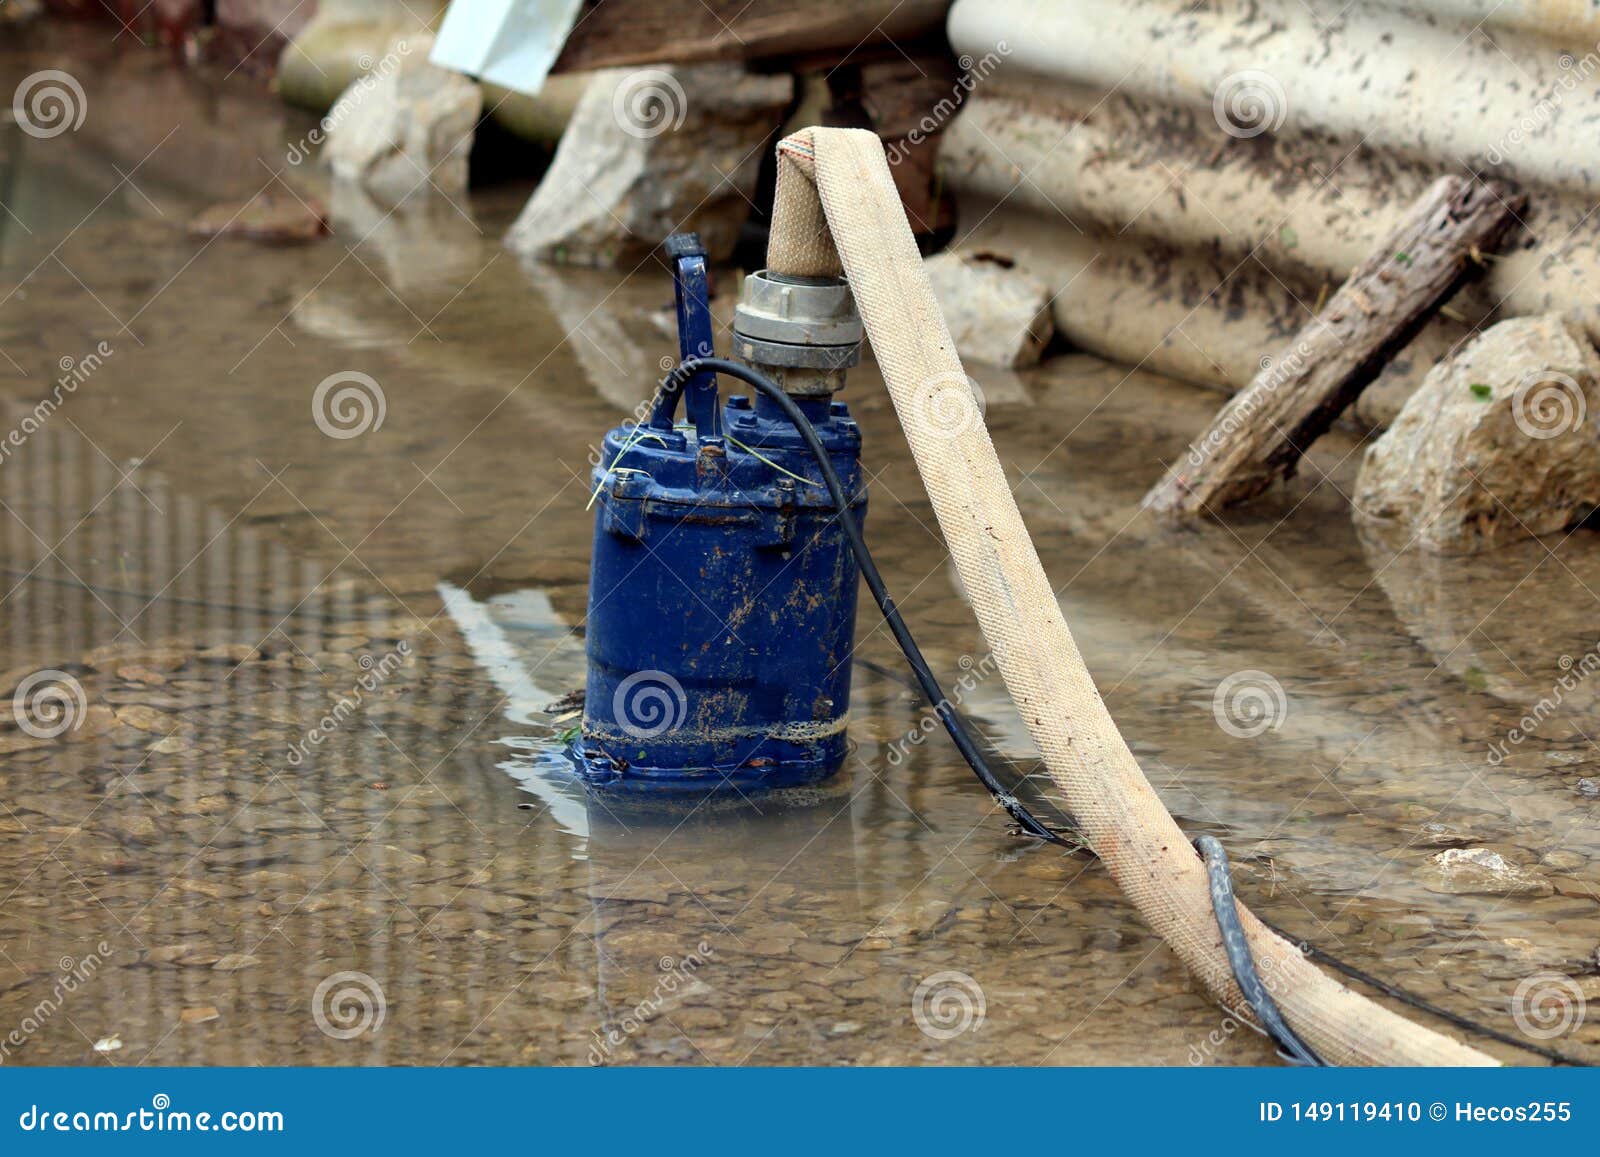 Heavily Used Old Partially Submerged Metal Water Pump Pumping Water From Flooded Backyard Through Fire Hose Surrounded With Rocks Stock Photo Image Of Water